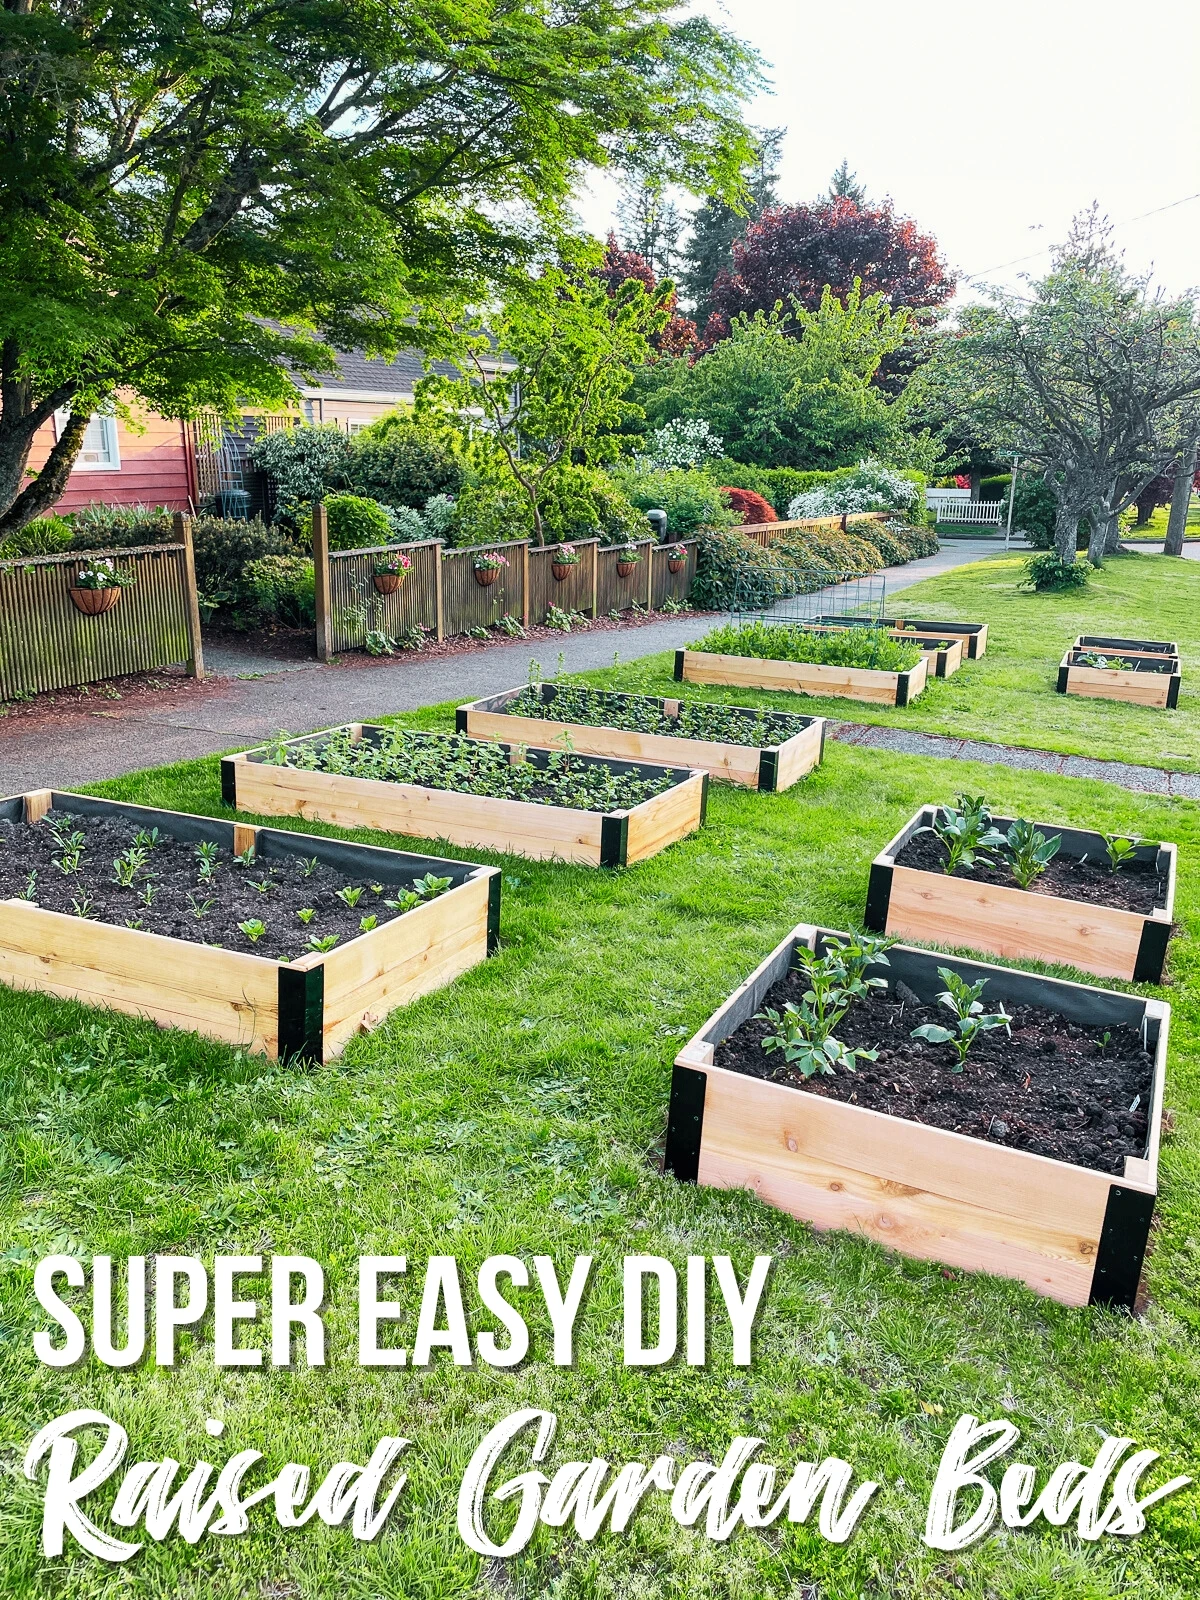 Cheap and Easy DIY Raised Garden Beds - The Handyman's Daughter